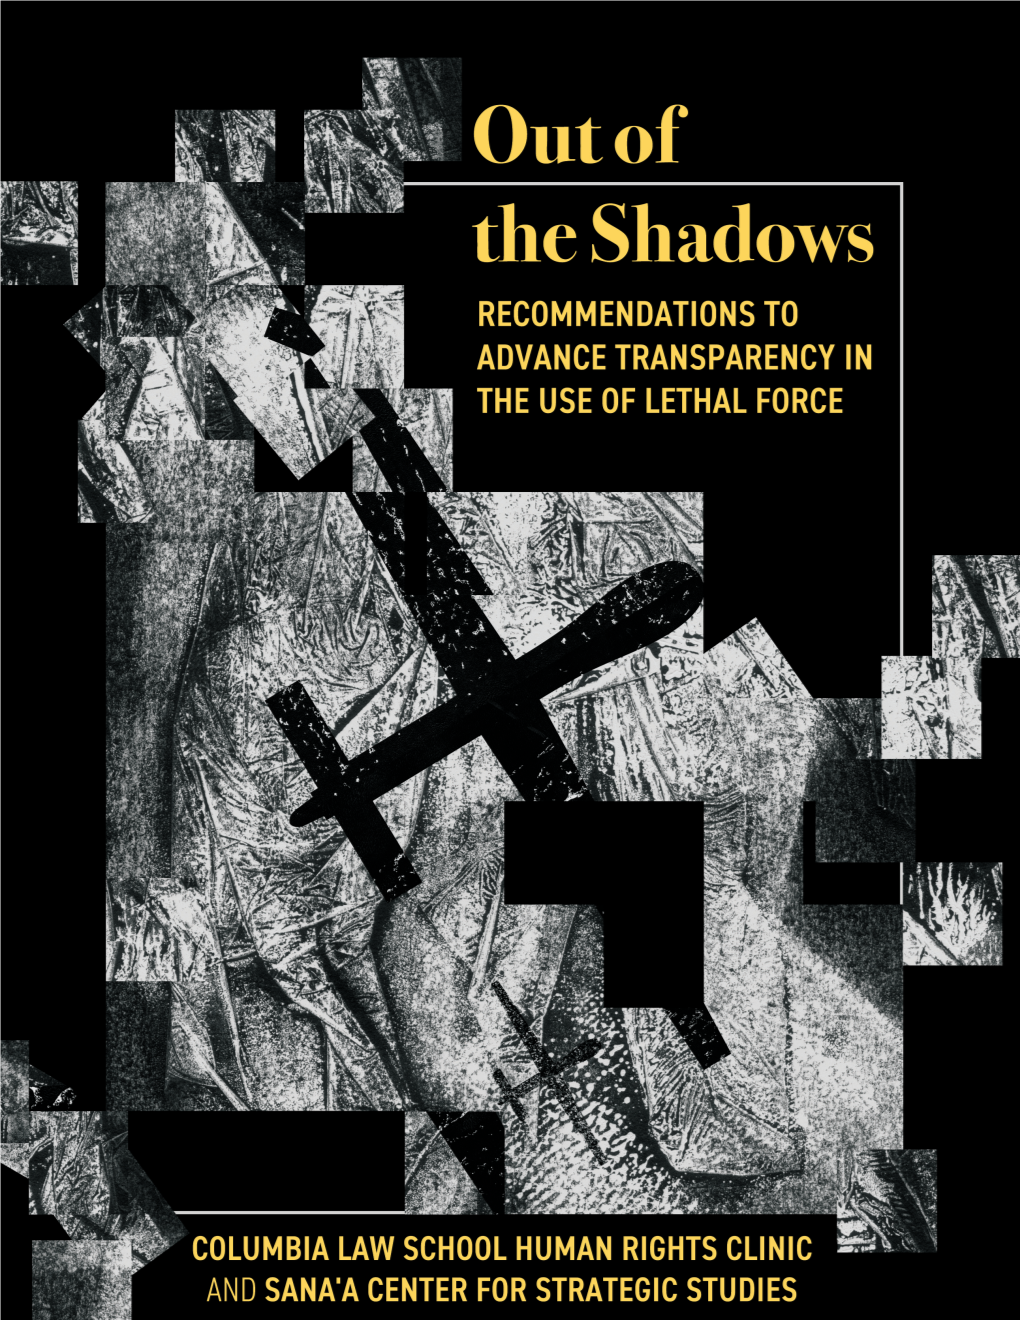 Out of the Shadows Recommendations to Advance Transparency in the Use of Lethal Force